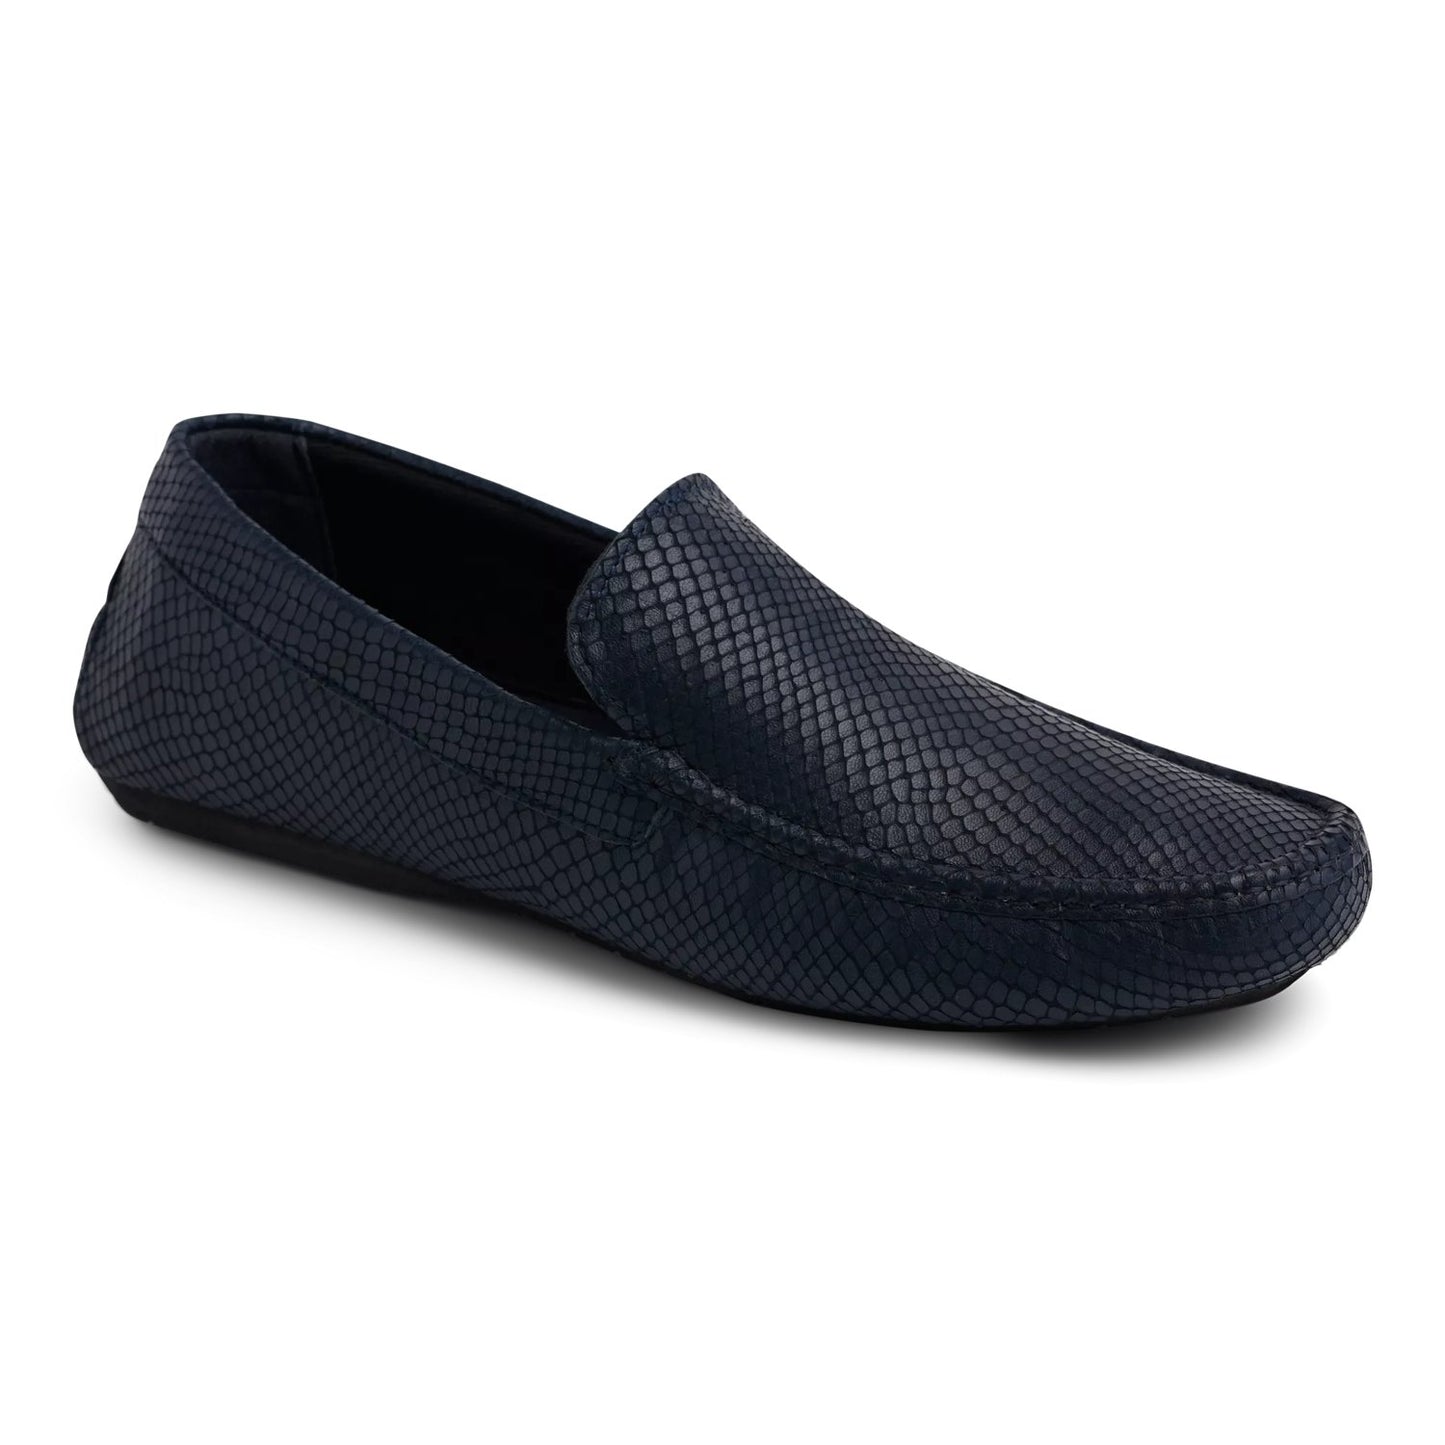 P-Donte Snake Embossed Leather Driving Moccasins